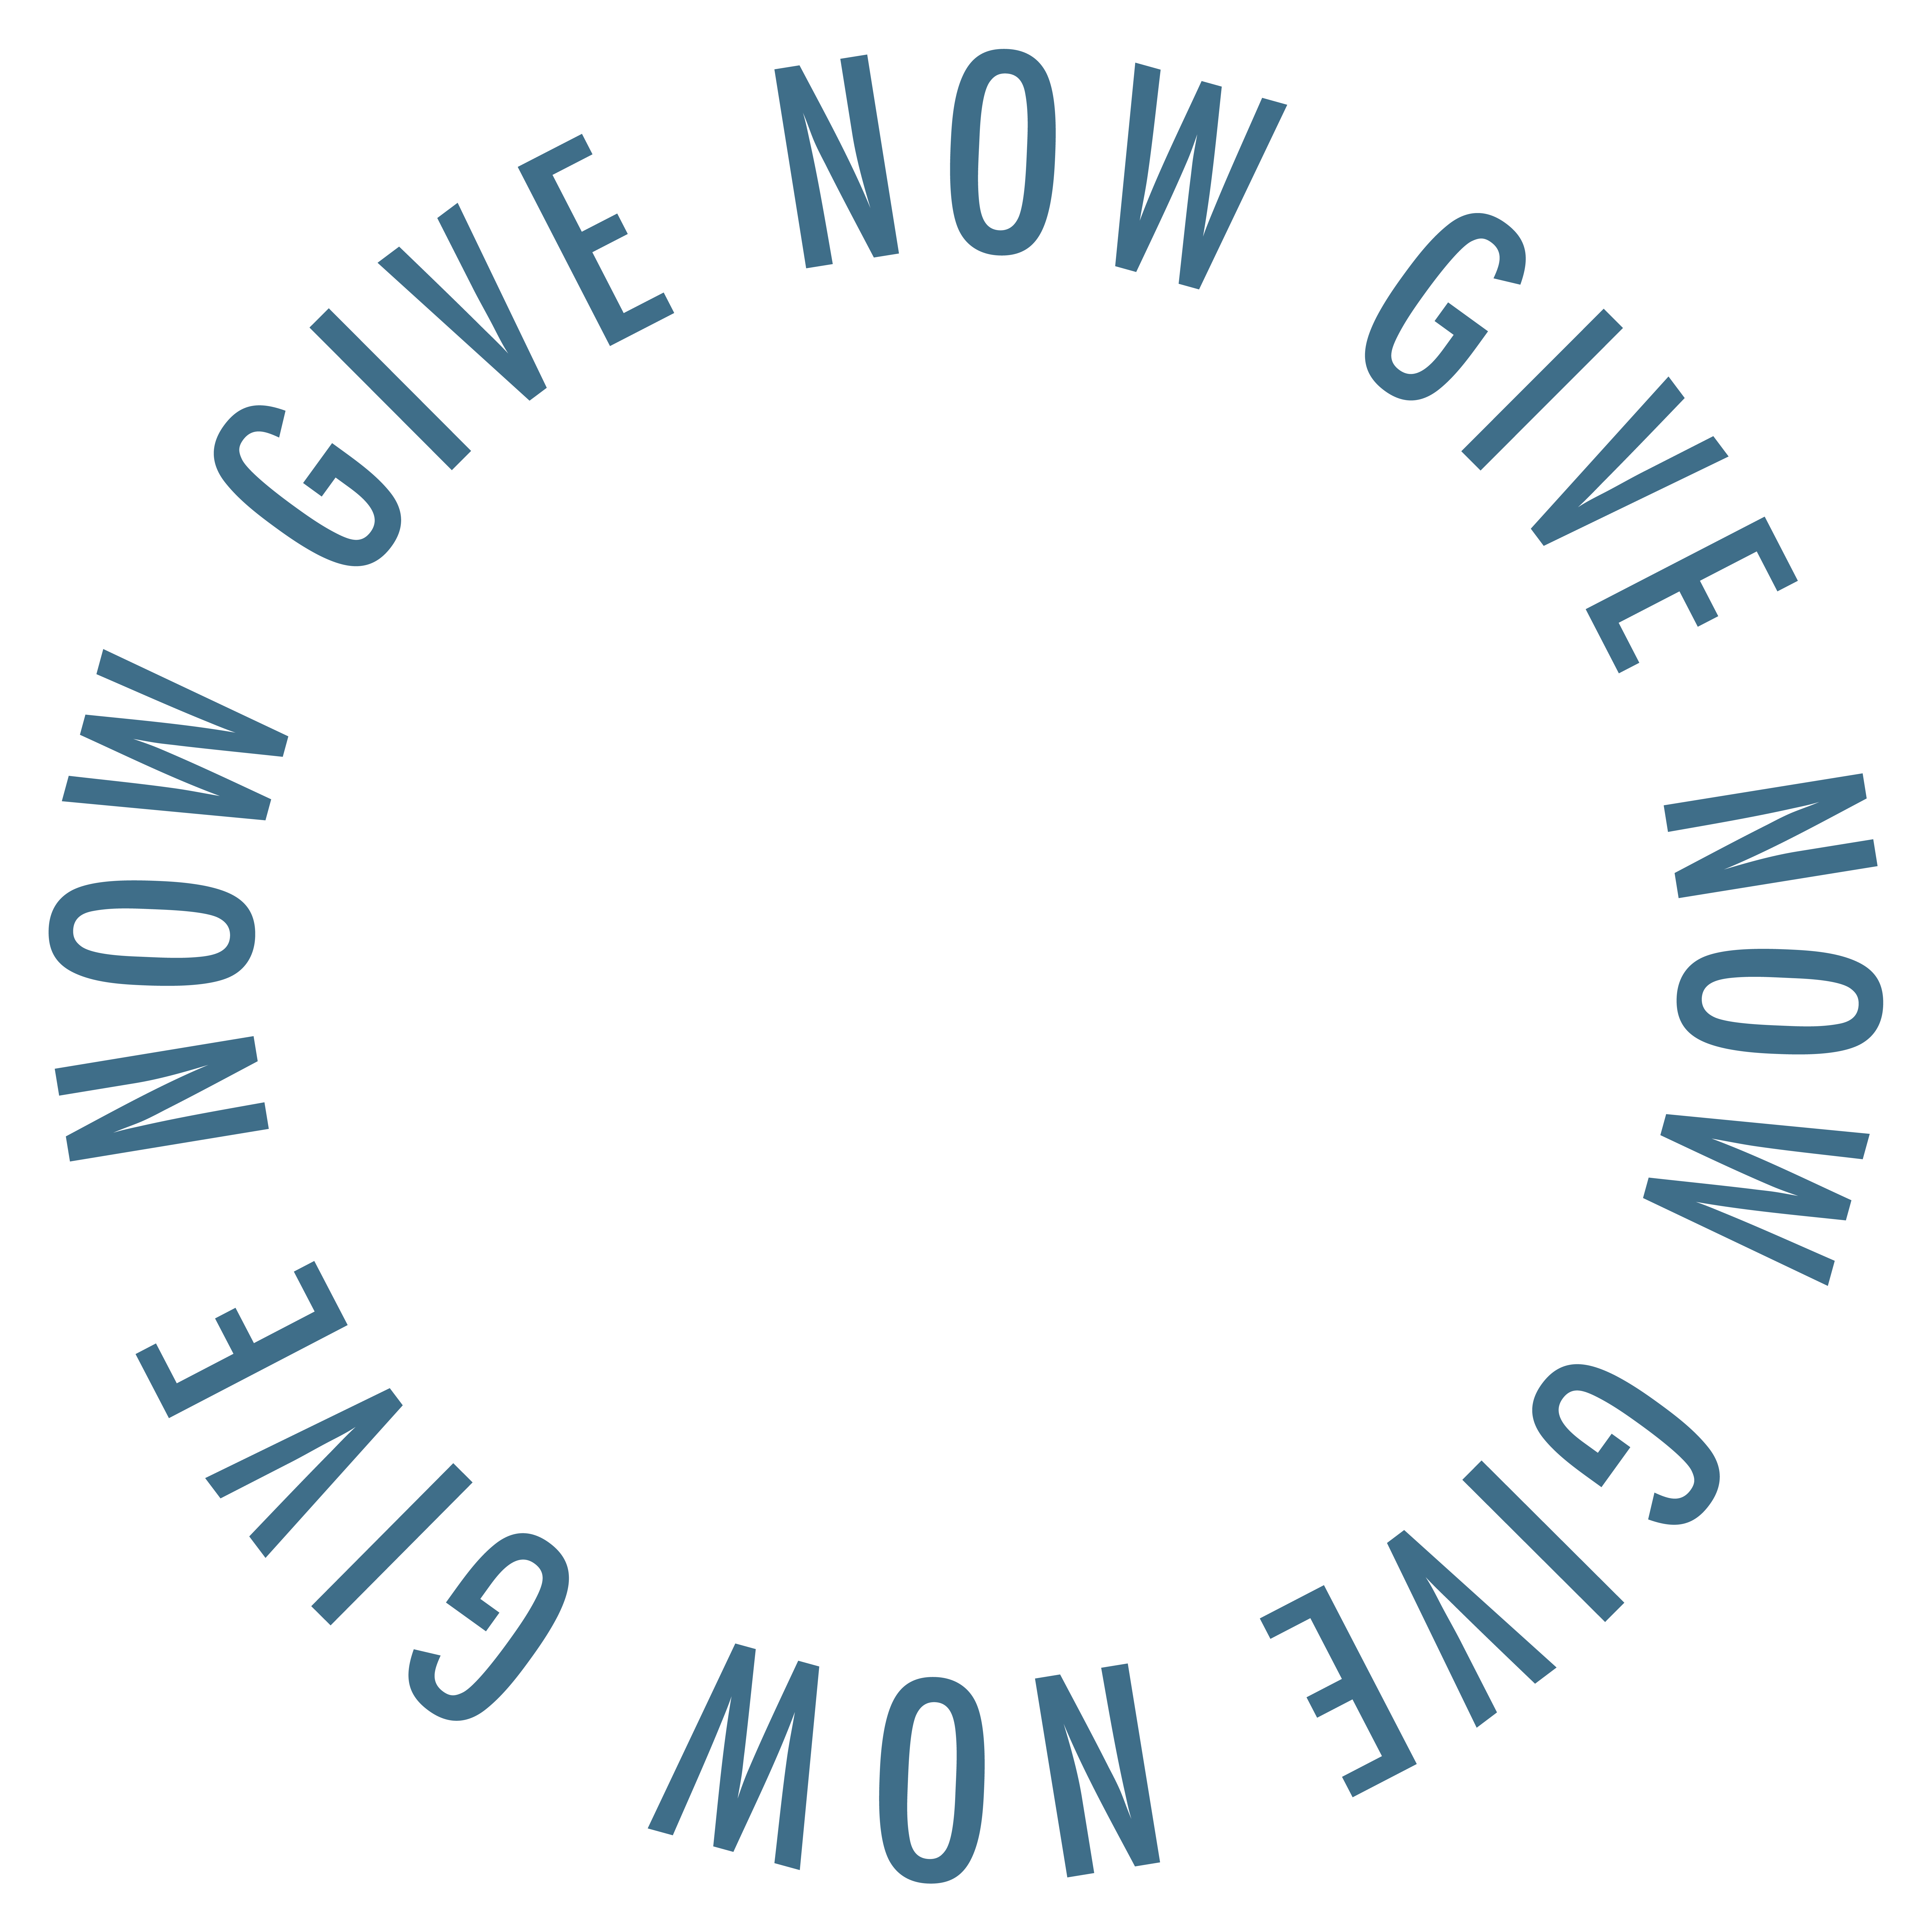 Give Now rotating animated text